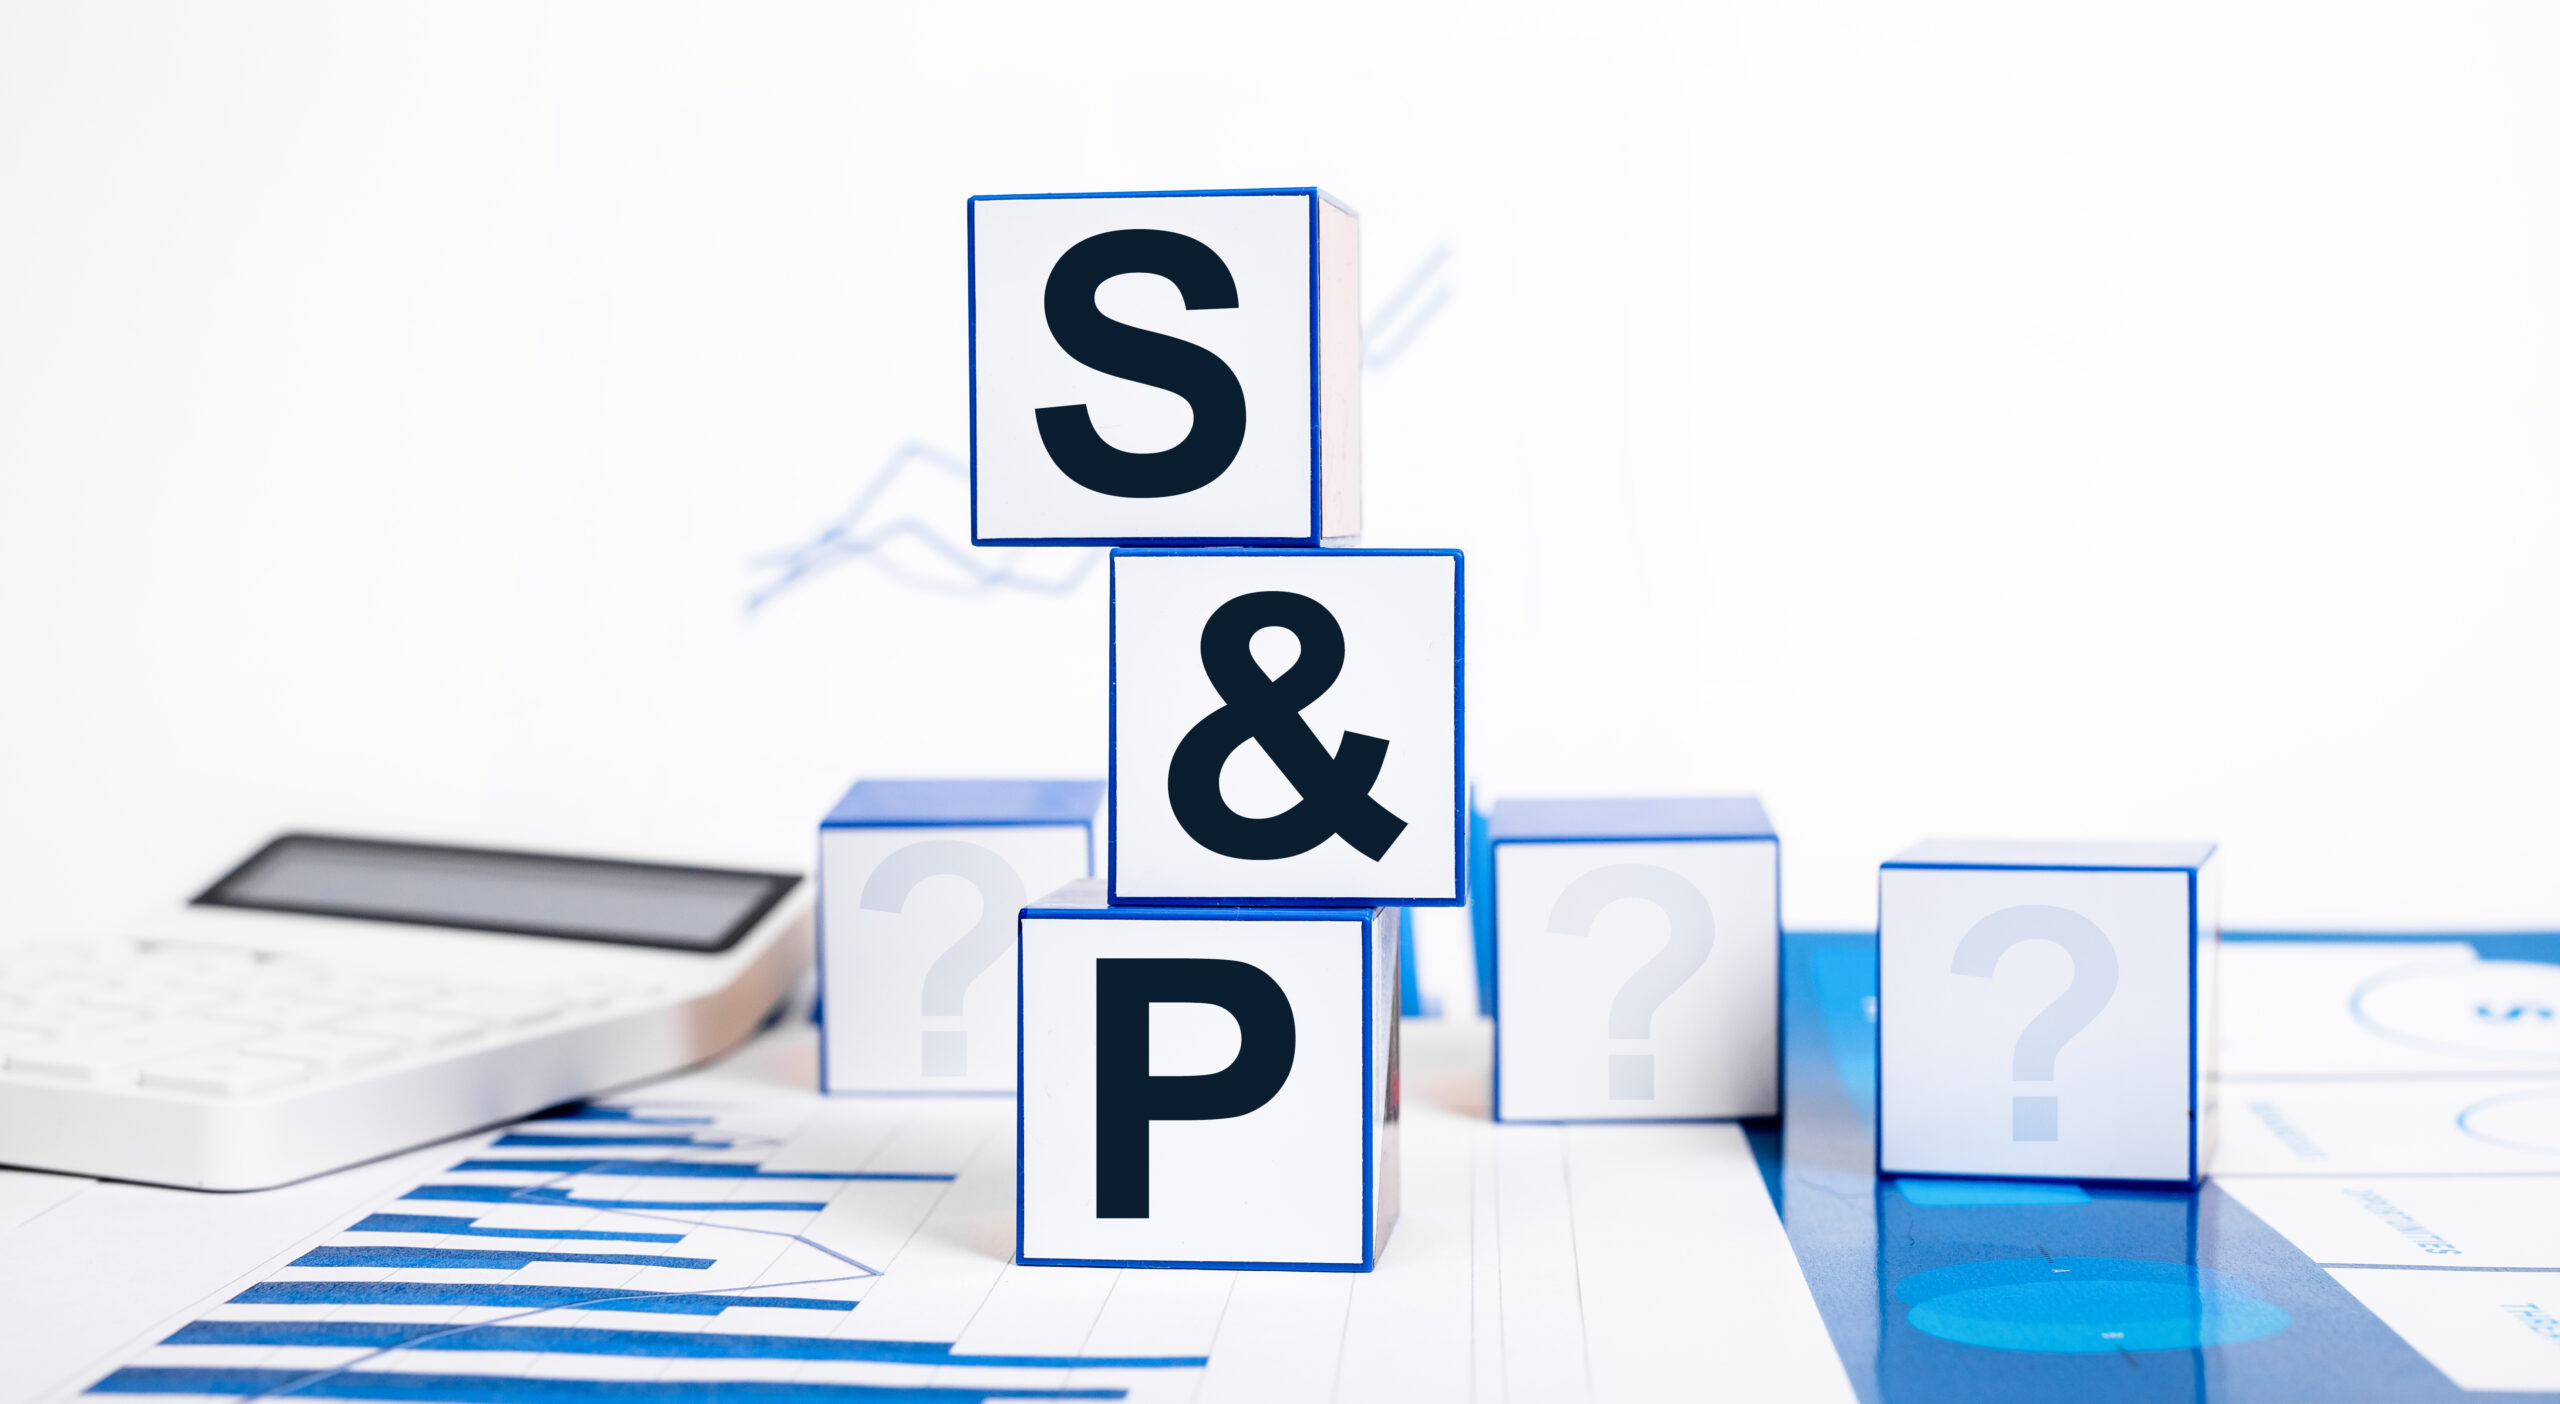 Building blocks with S&P